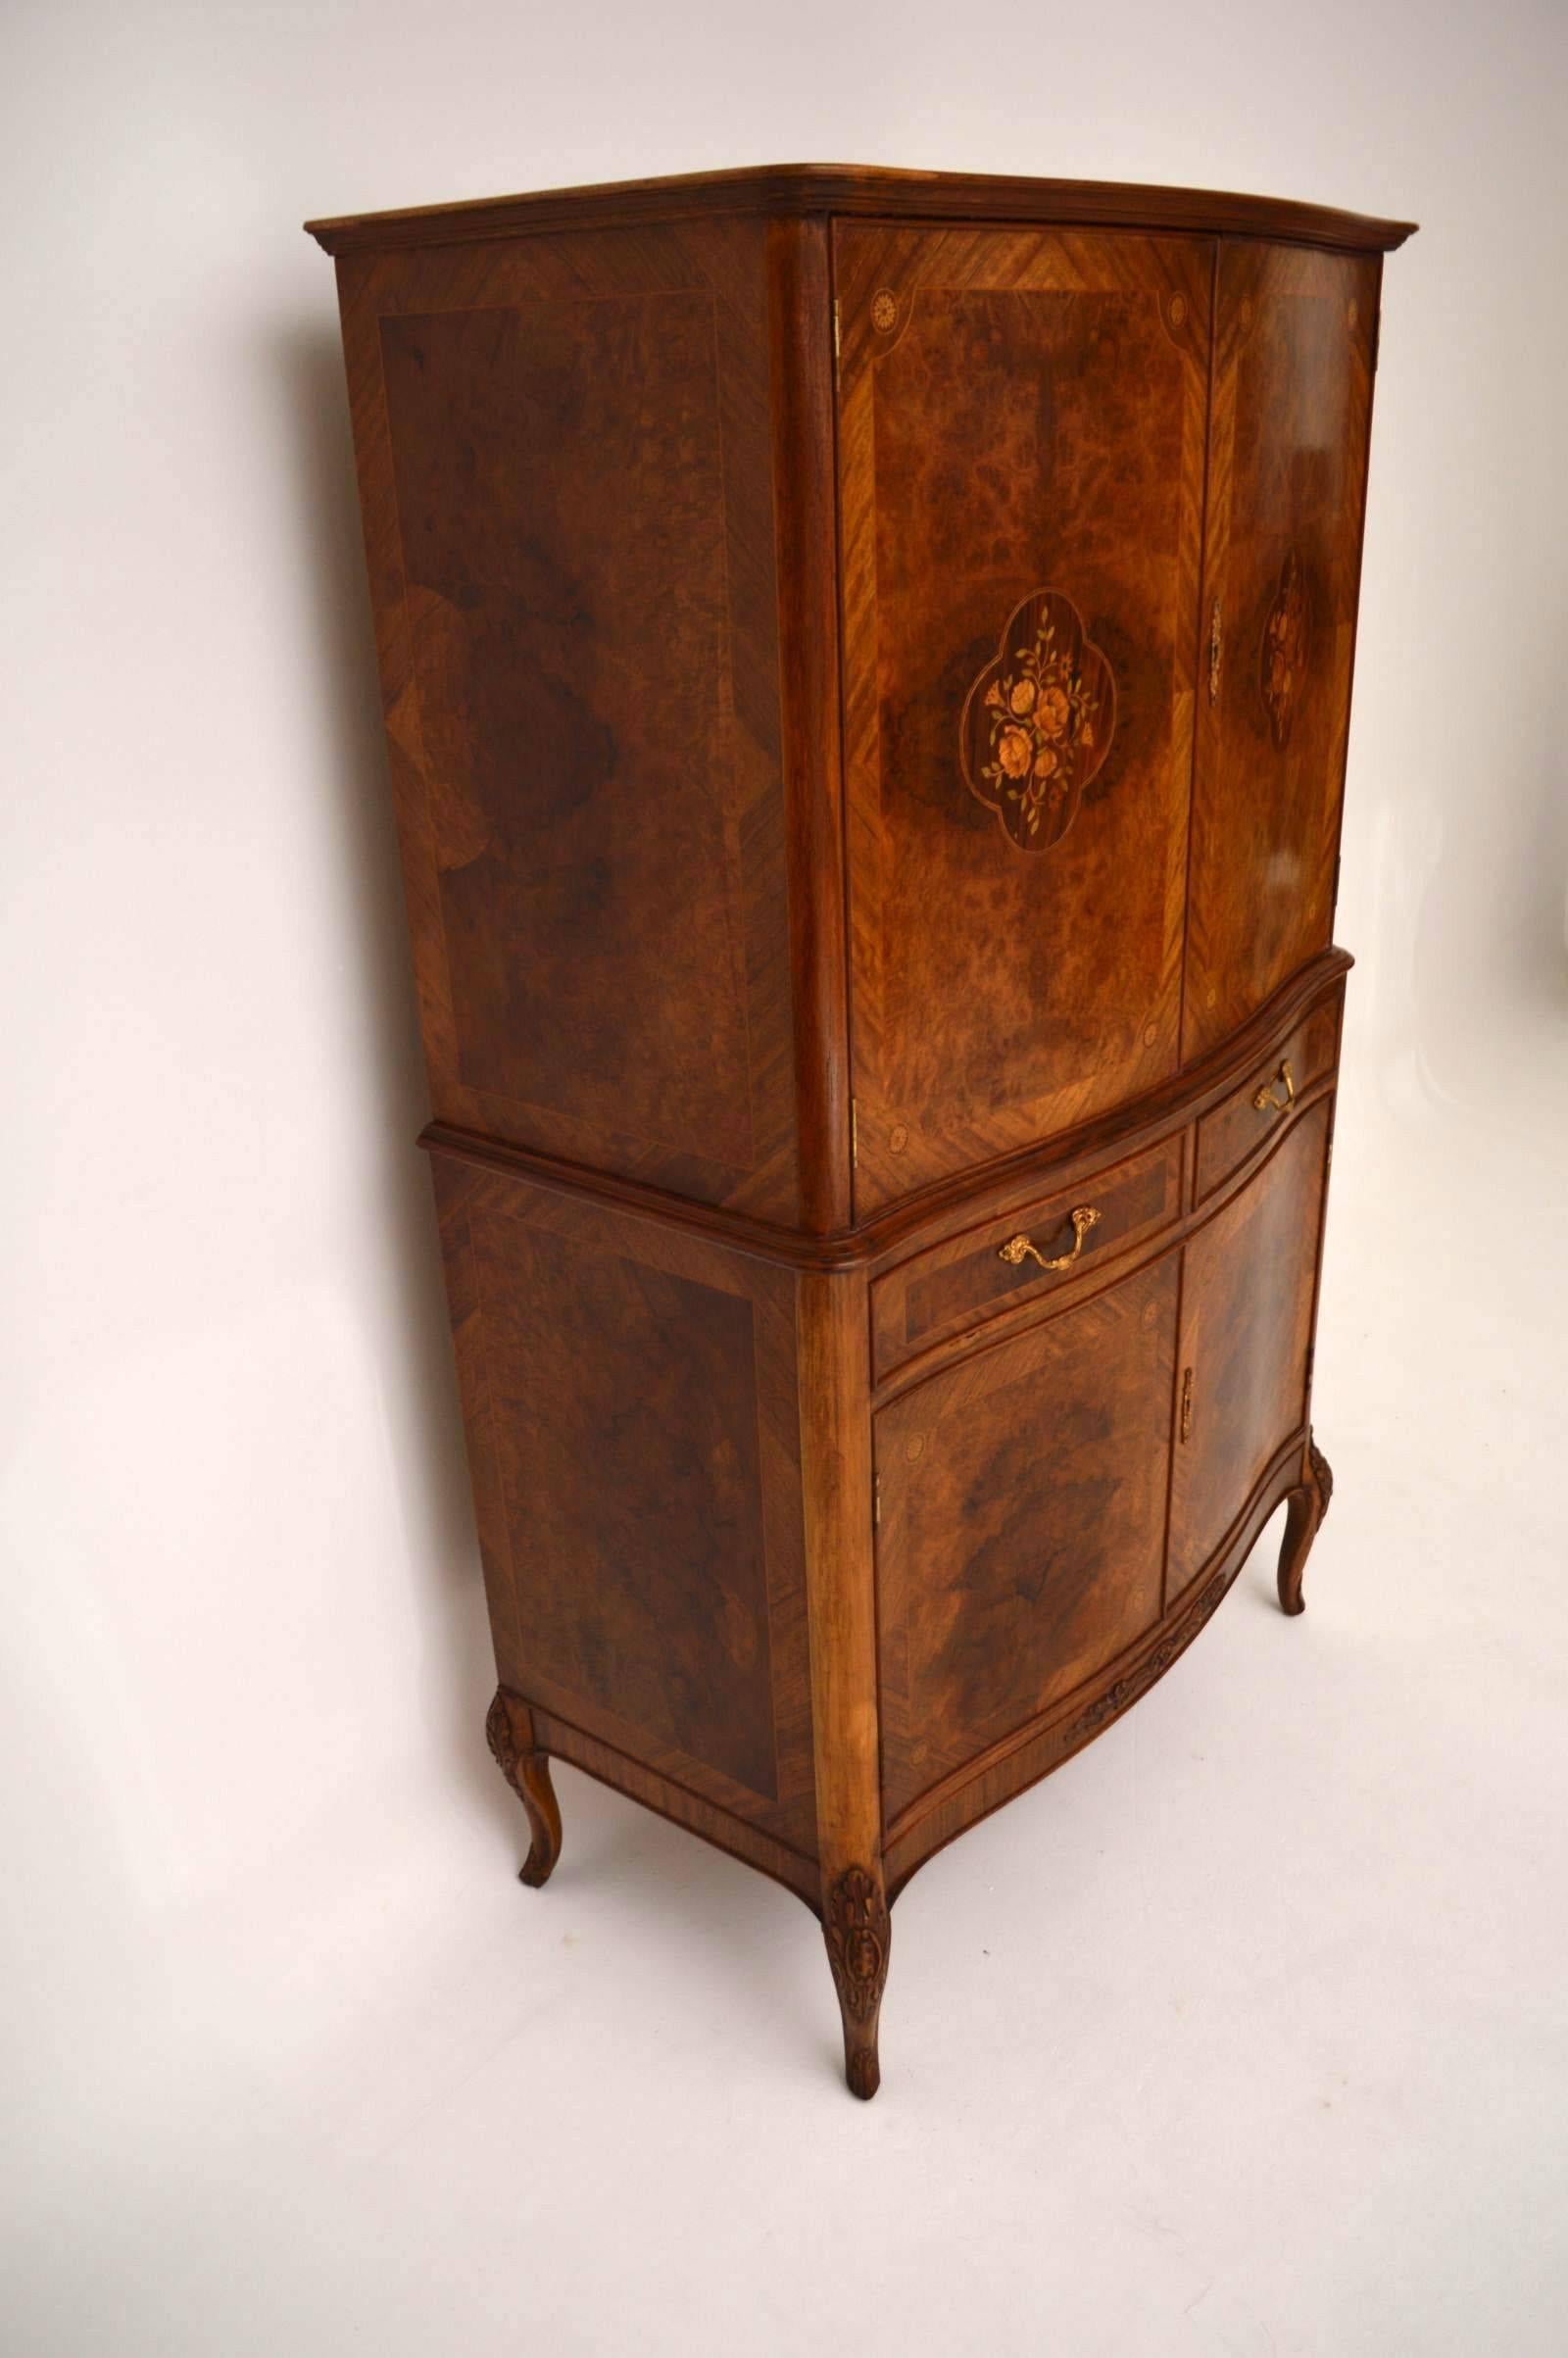 Antique French style cocktail drinks cabinet with stunning burr walnut door panels and intricate floral marquetry on the top doors. The sides are also burr walnut and there are other woods on this piece, like rosewood and many exotic woods in the